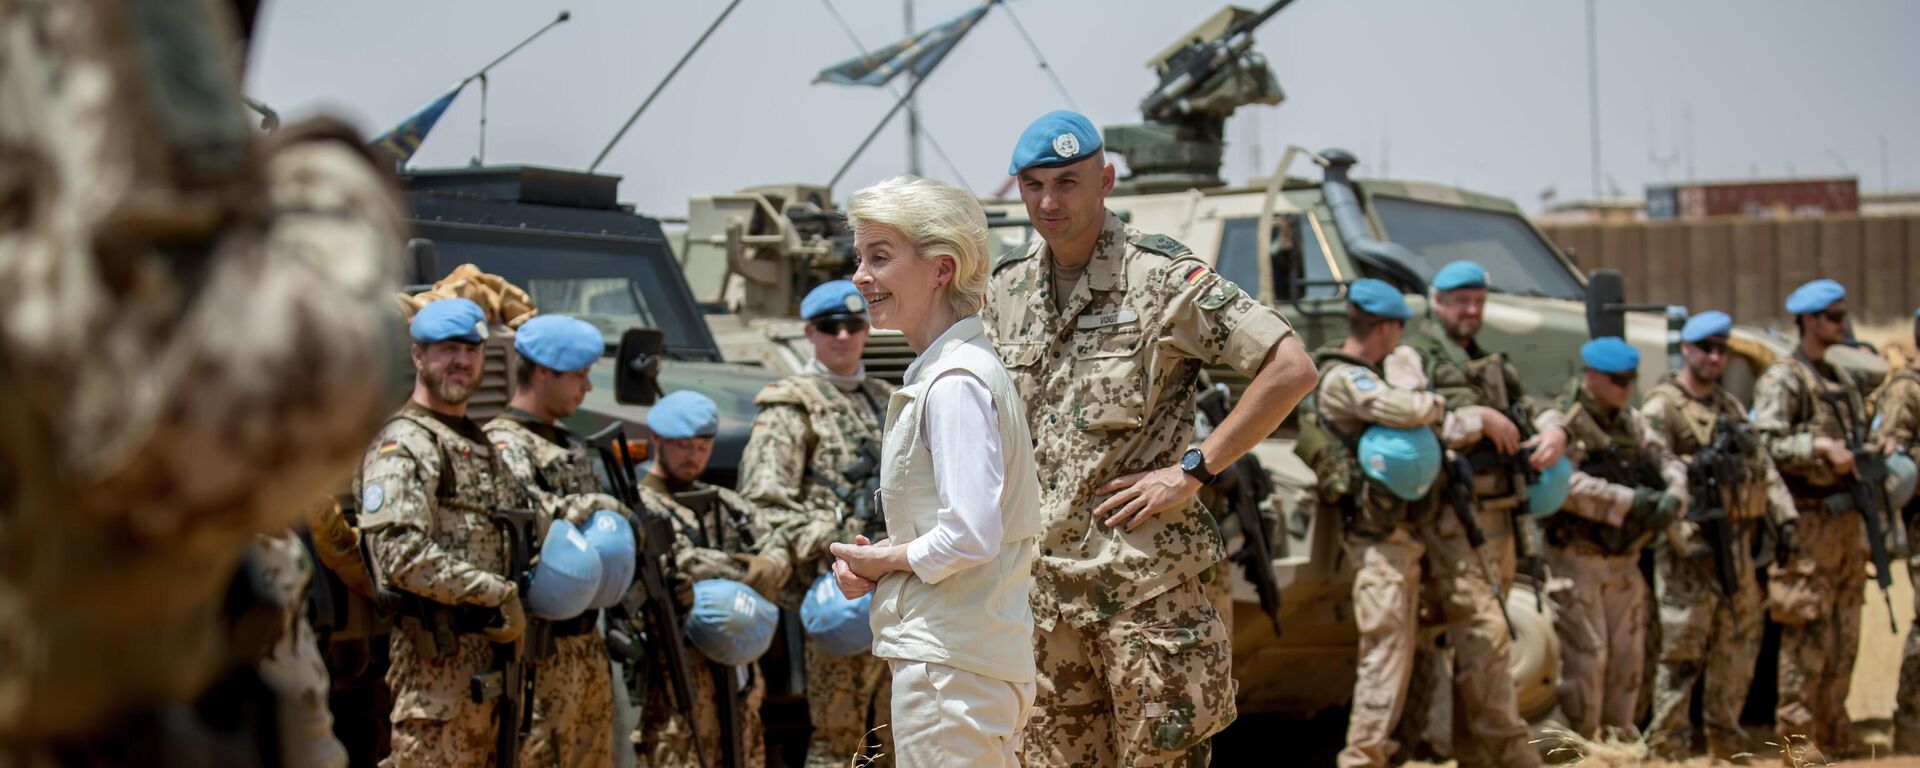 In this Tuesday April 5, 2016 file photo, German defense minister Ursula von der Leyen, left, speaks to German soldiers next to the commander of the German troops, Lieutenant Colonel Marc Vogt, right, at Camp Castor near Gao, Mali. The German government on Wednesday Jan. 11, 2017, has approved an expansion of the country's military deployment in Mali, with Berlin sending more helicopters to support the U.N. peacekeeping mission there. - Sputnik Africa, 1920, 16.12.2022